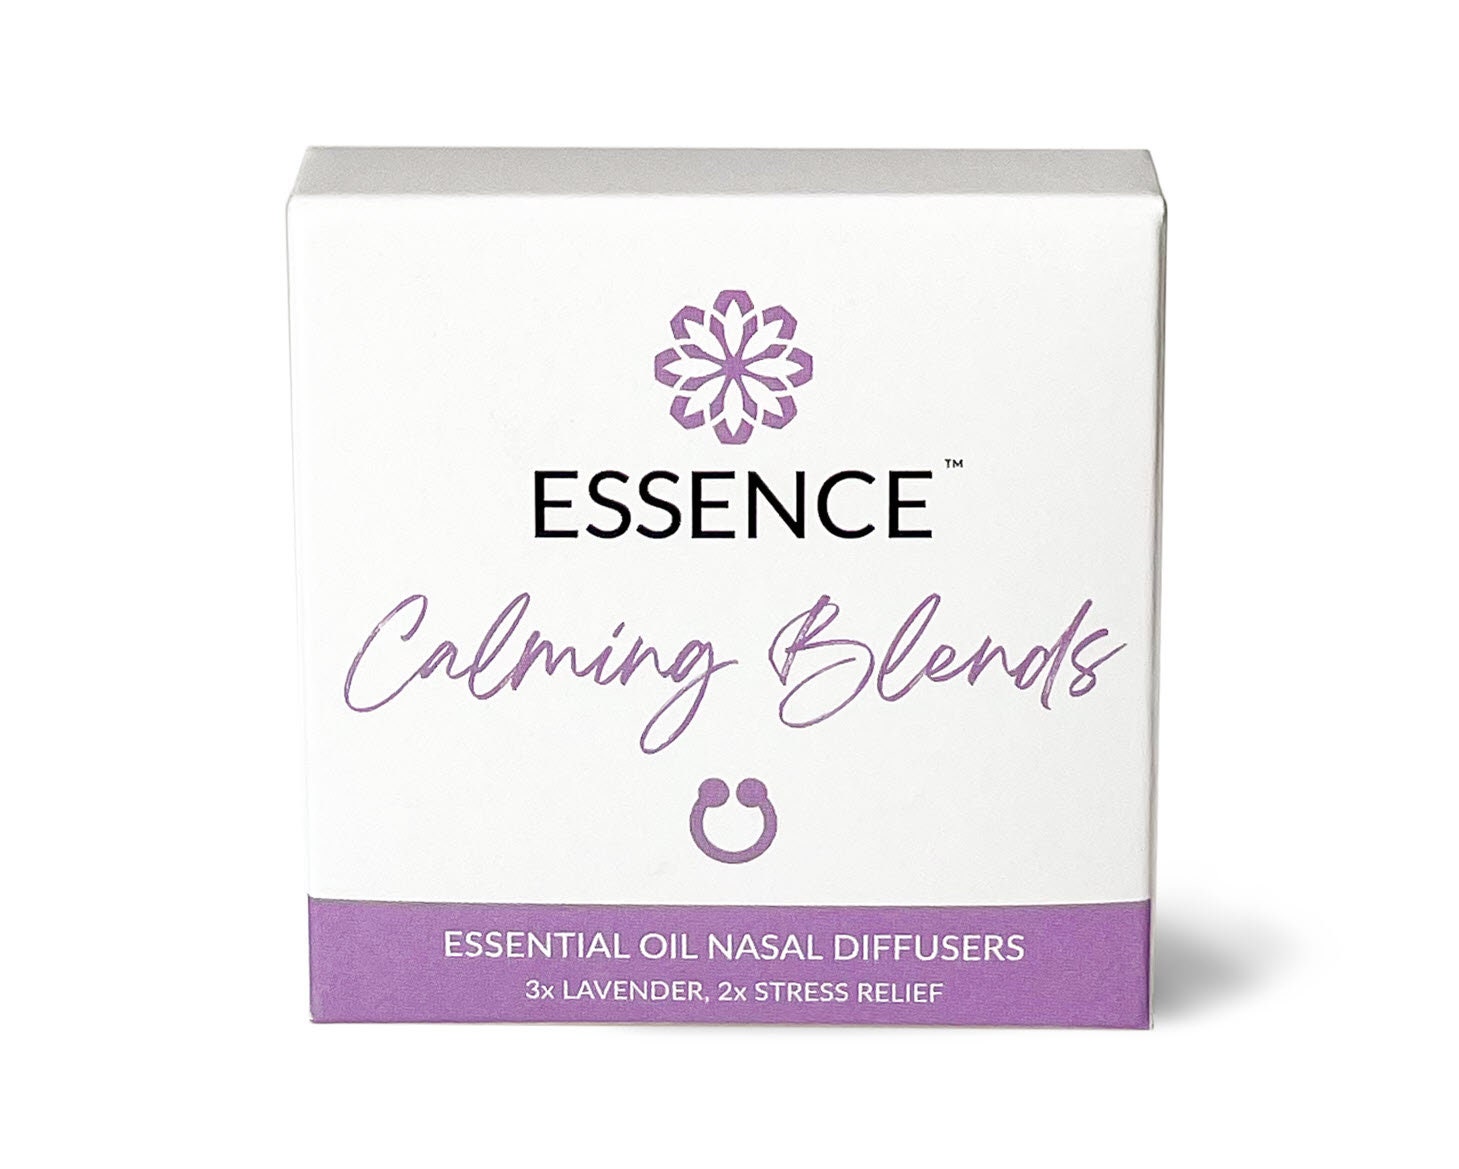 Essence Nose Diffuser Calming Blends 5 Pack